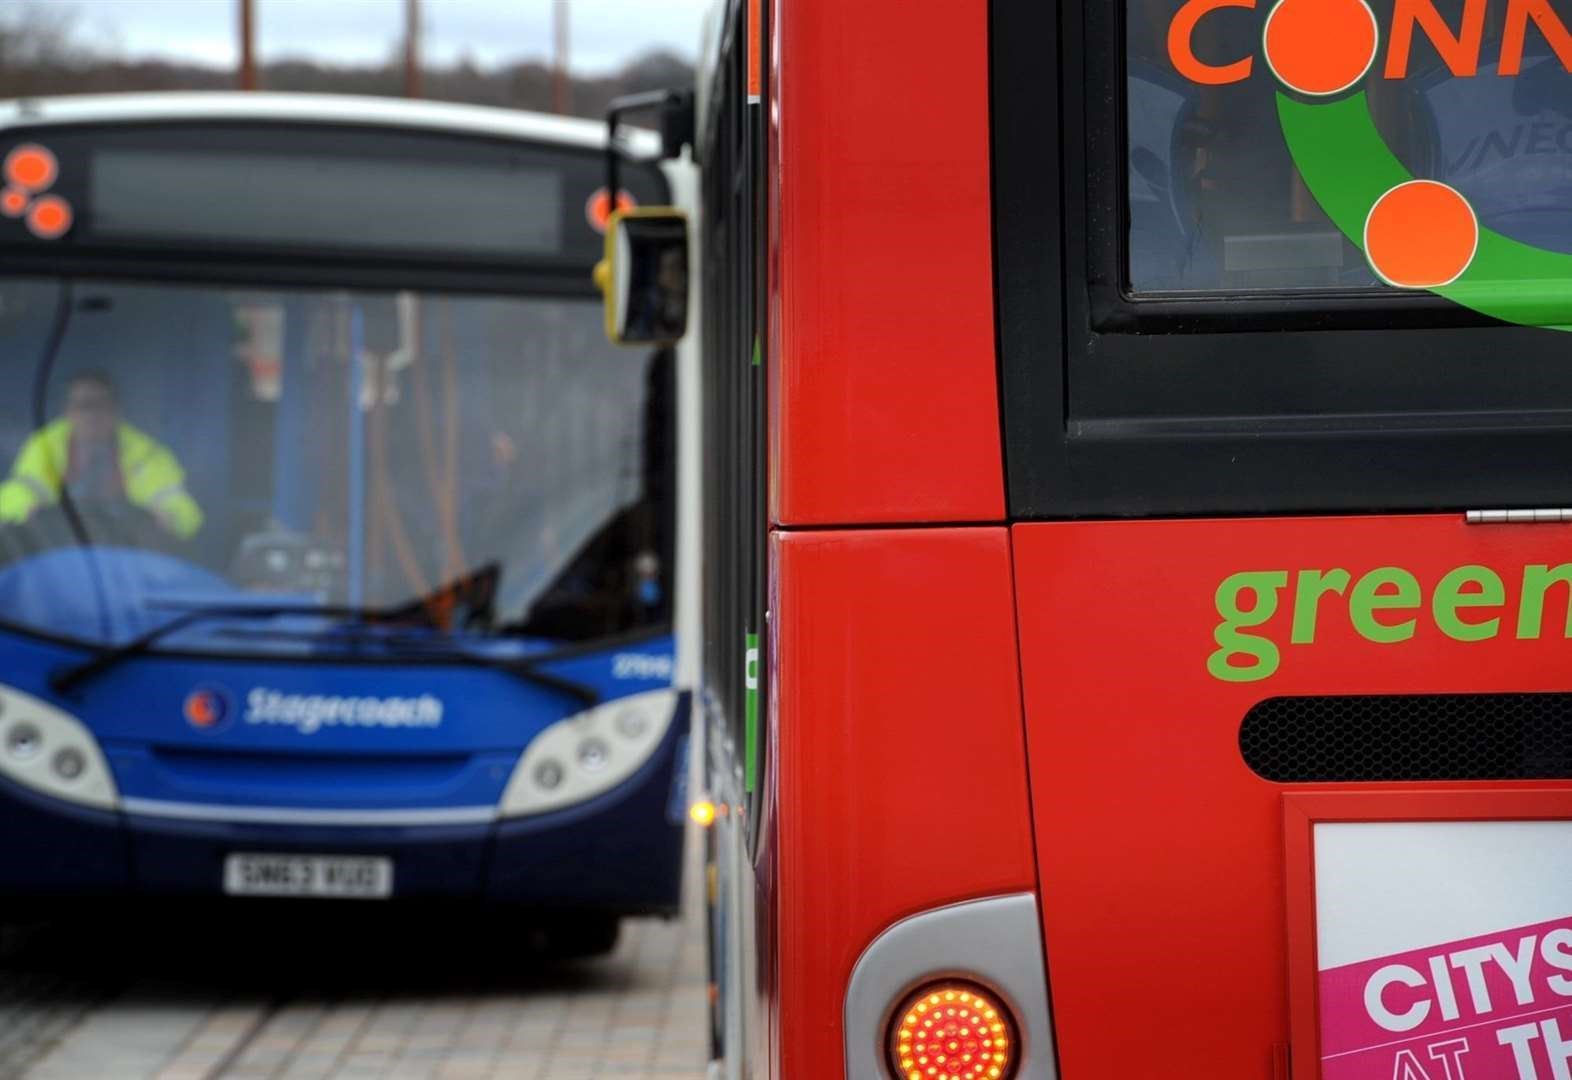 Bus service levels in Moray will increase from Monday.